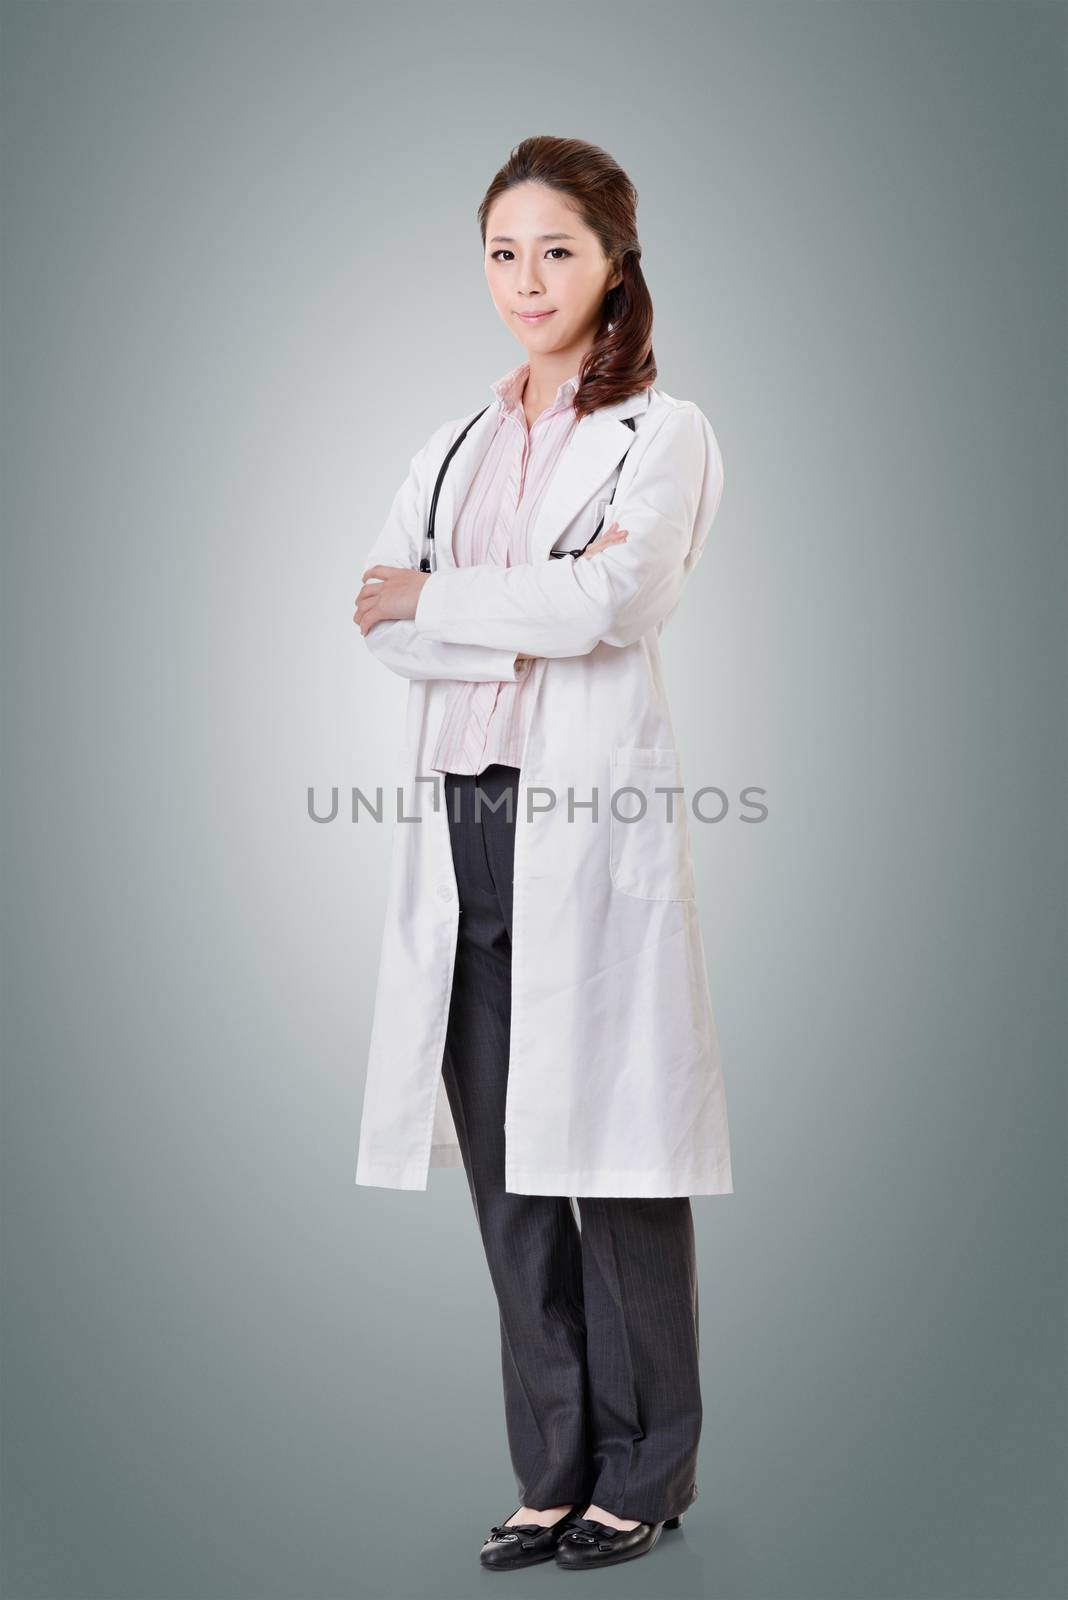 Friendly Asian doctor woman, full length portrait isolated.